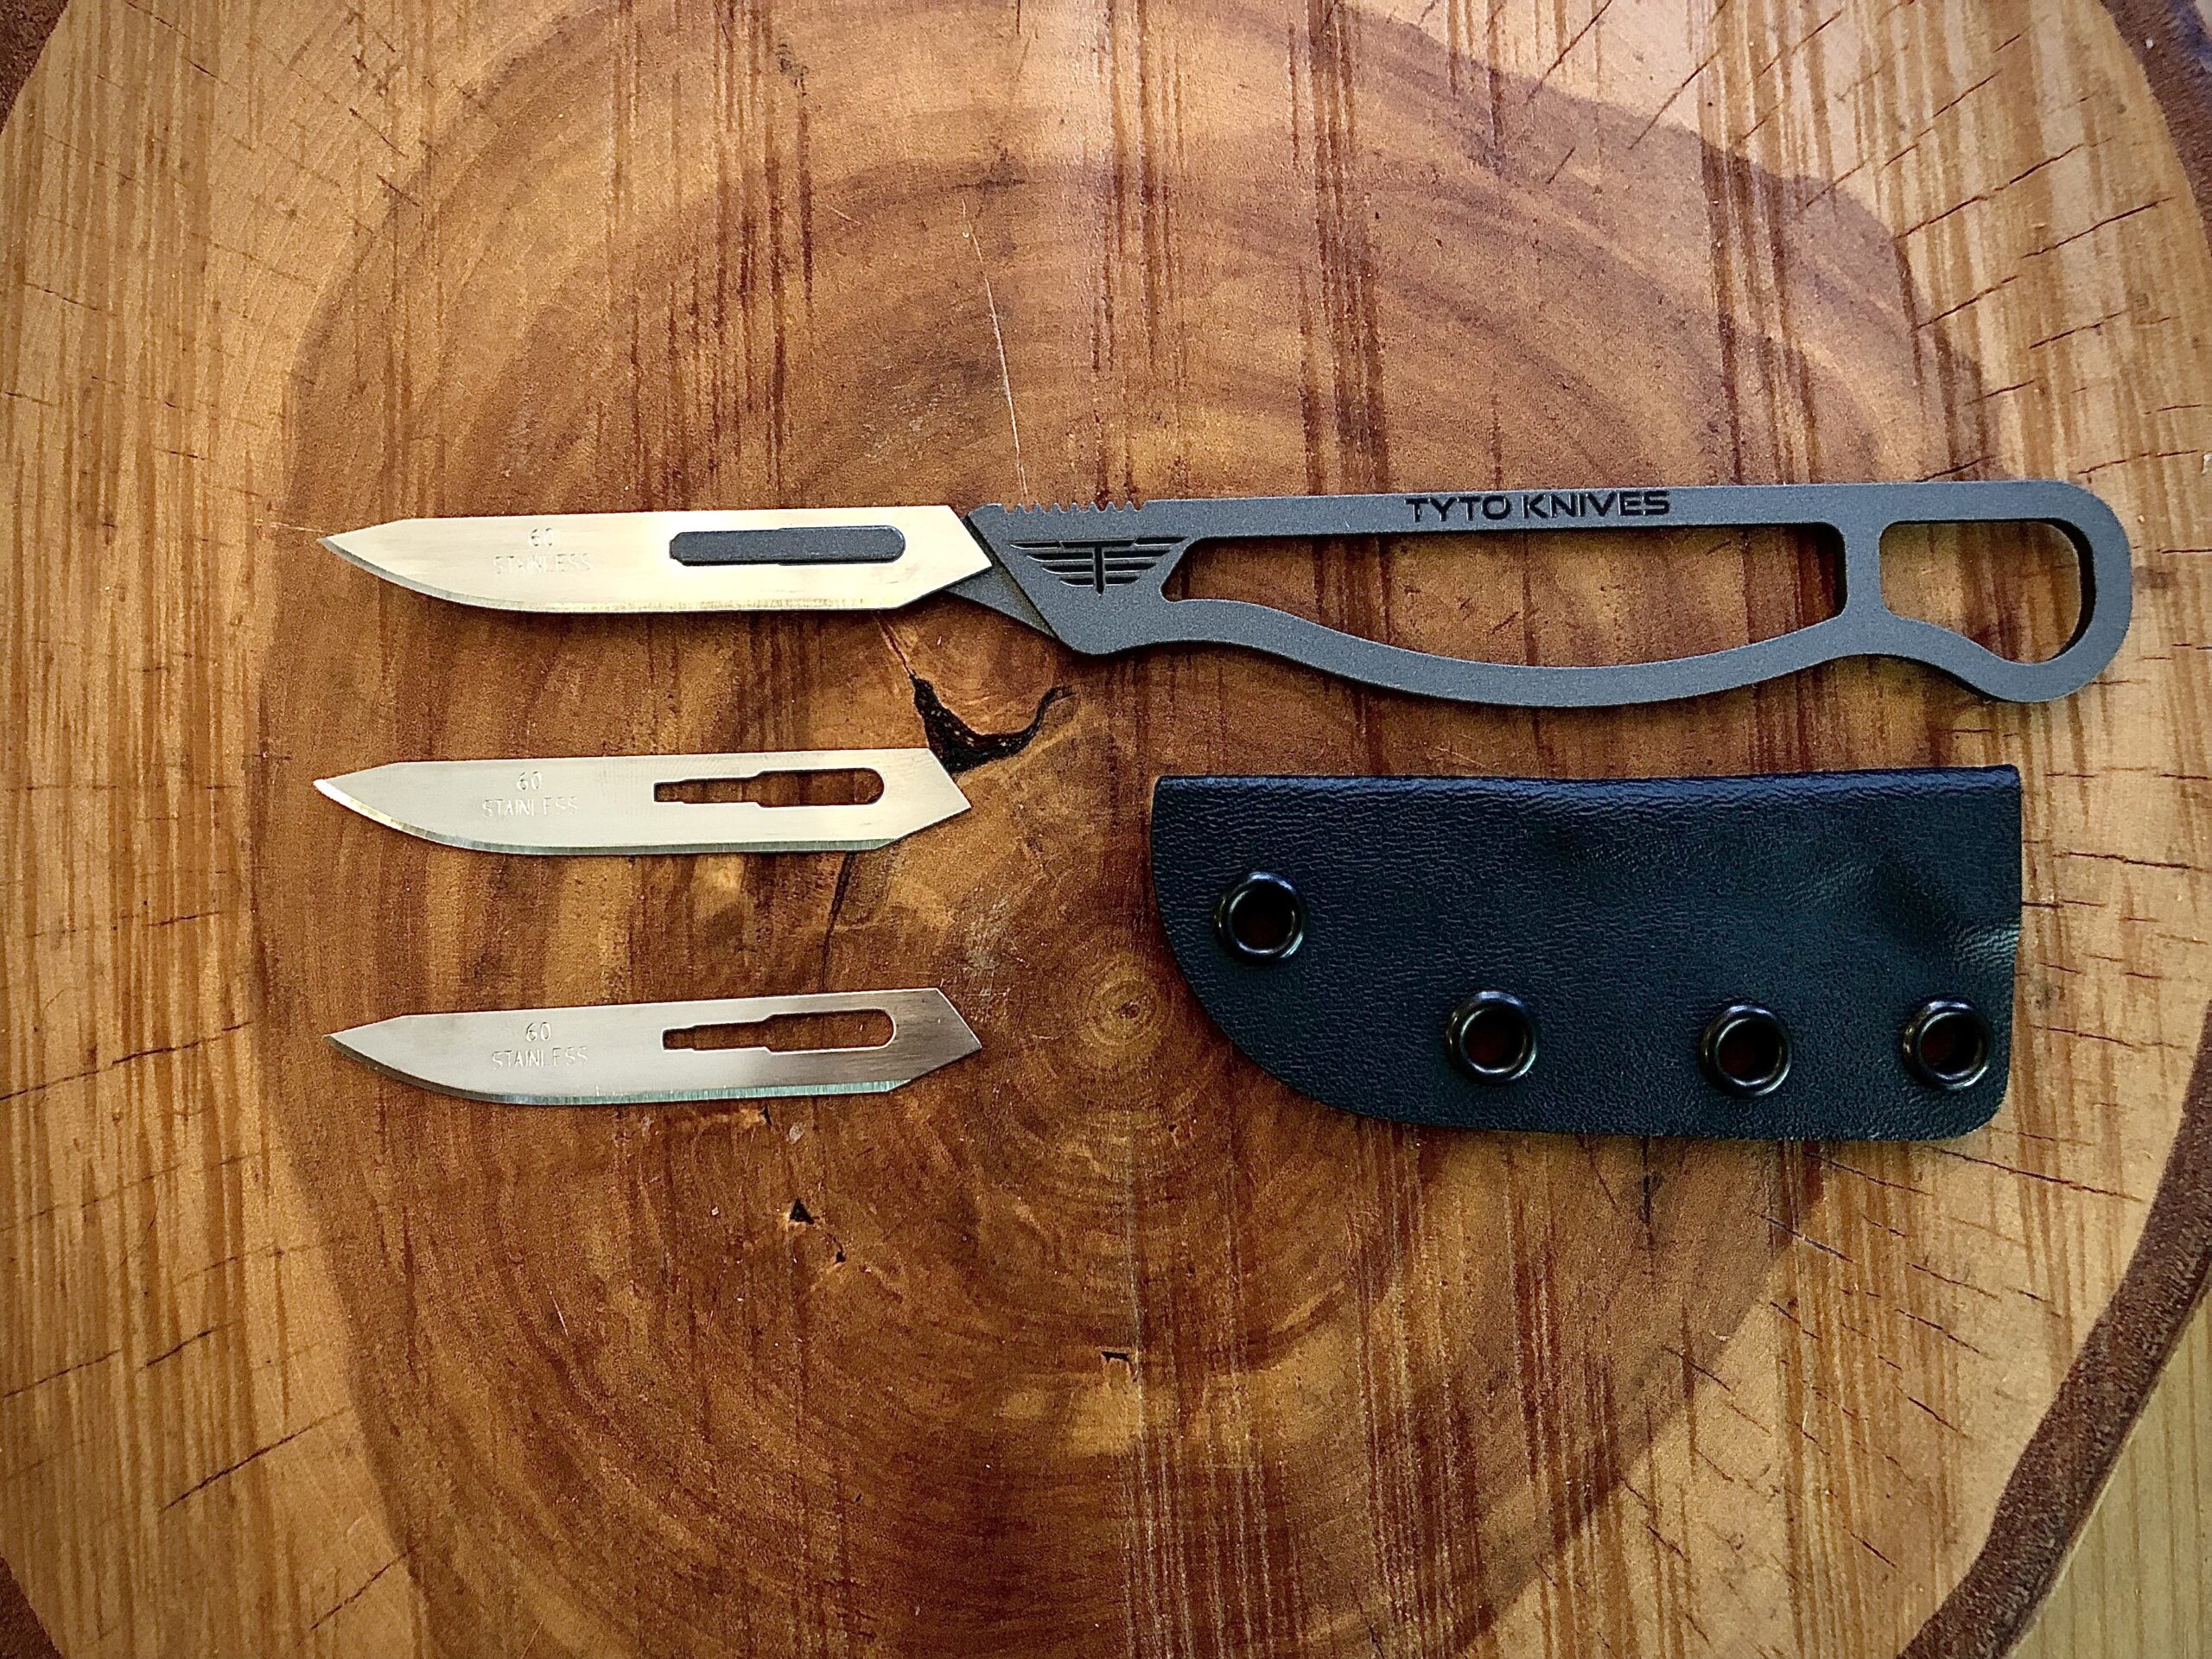 Replaceable blade skinning knives and hunting knives by Havalon Knives.  Blades